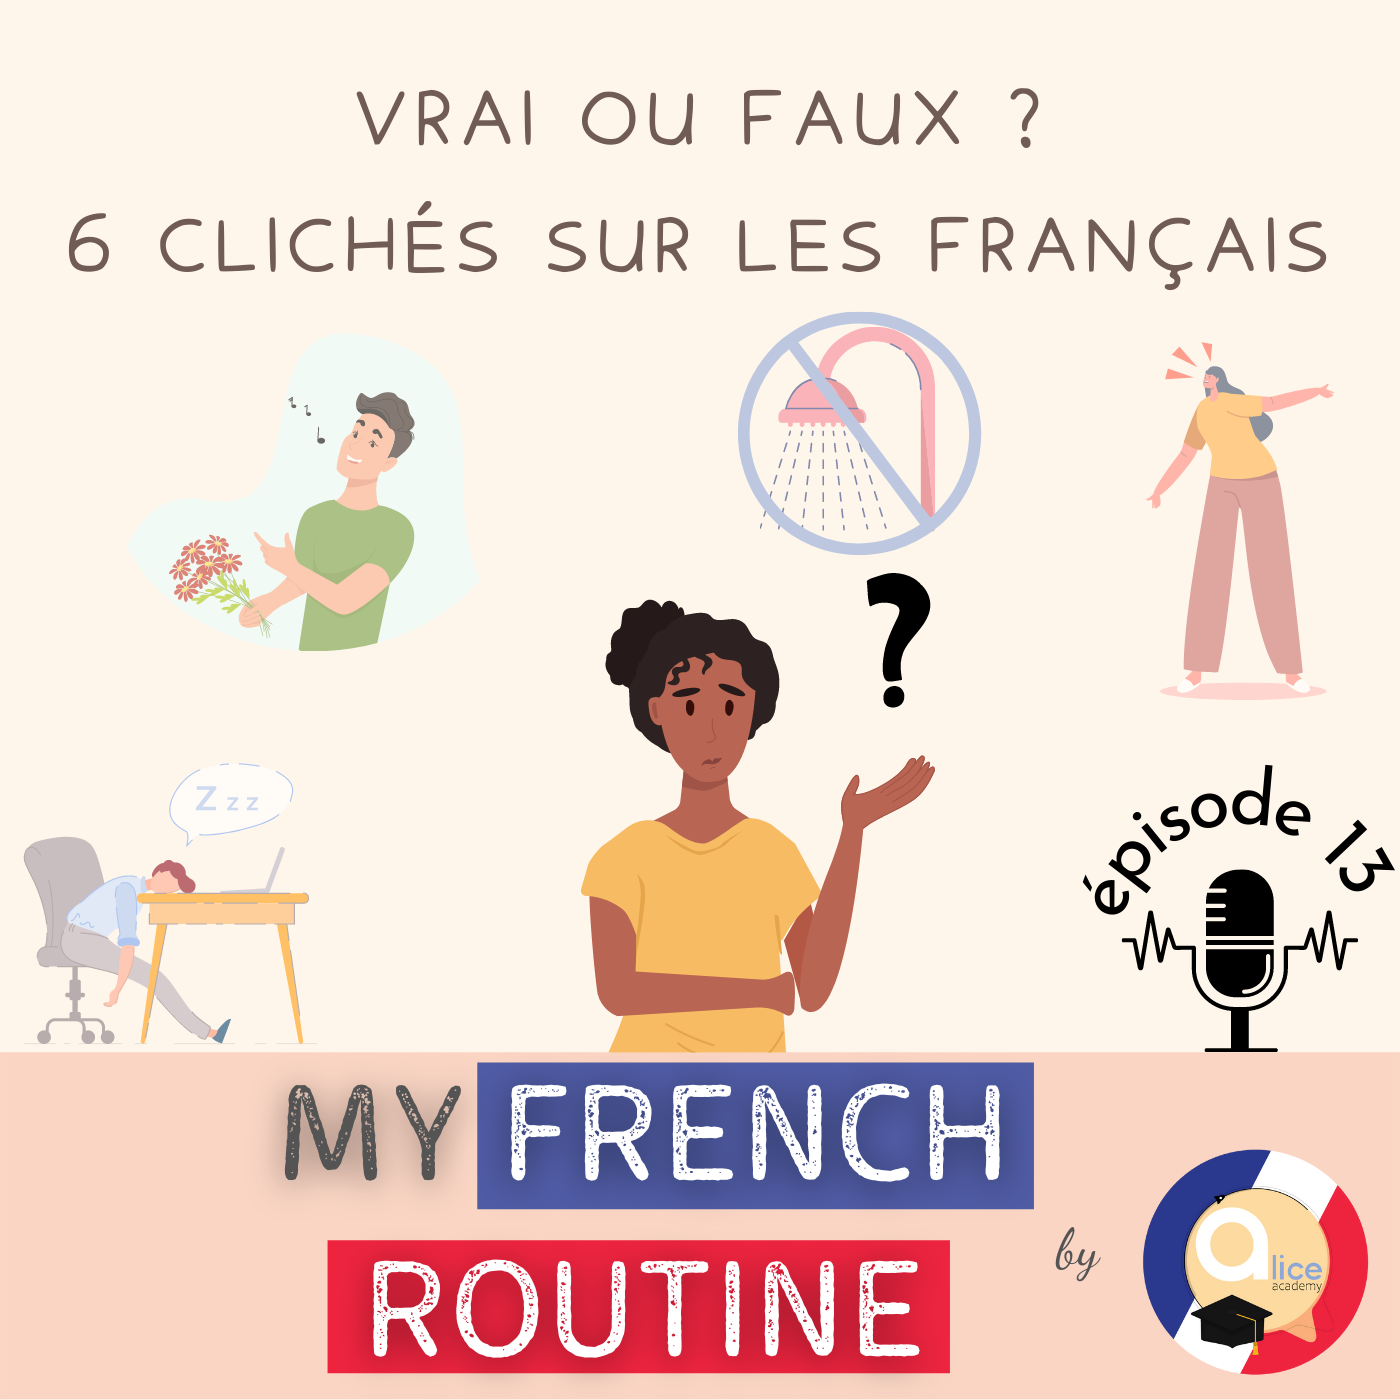 Clichés about French